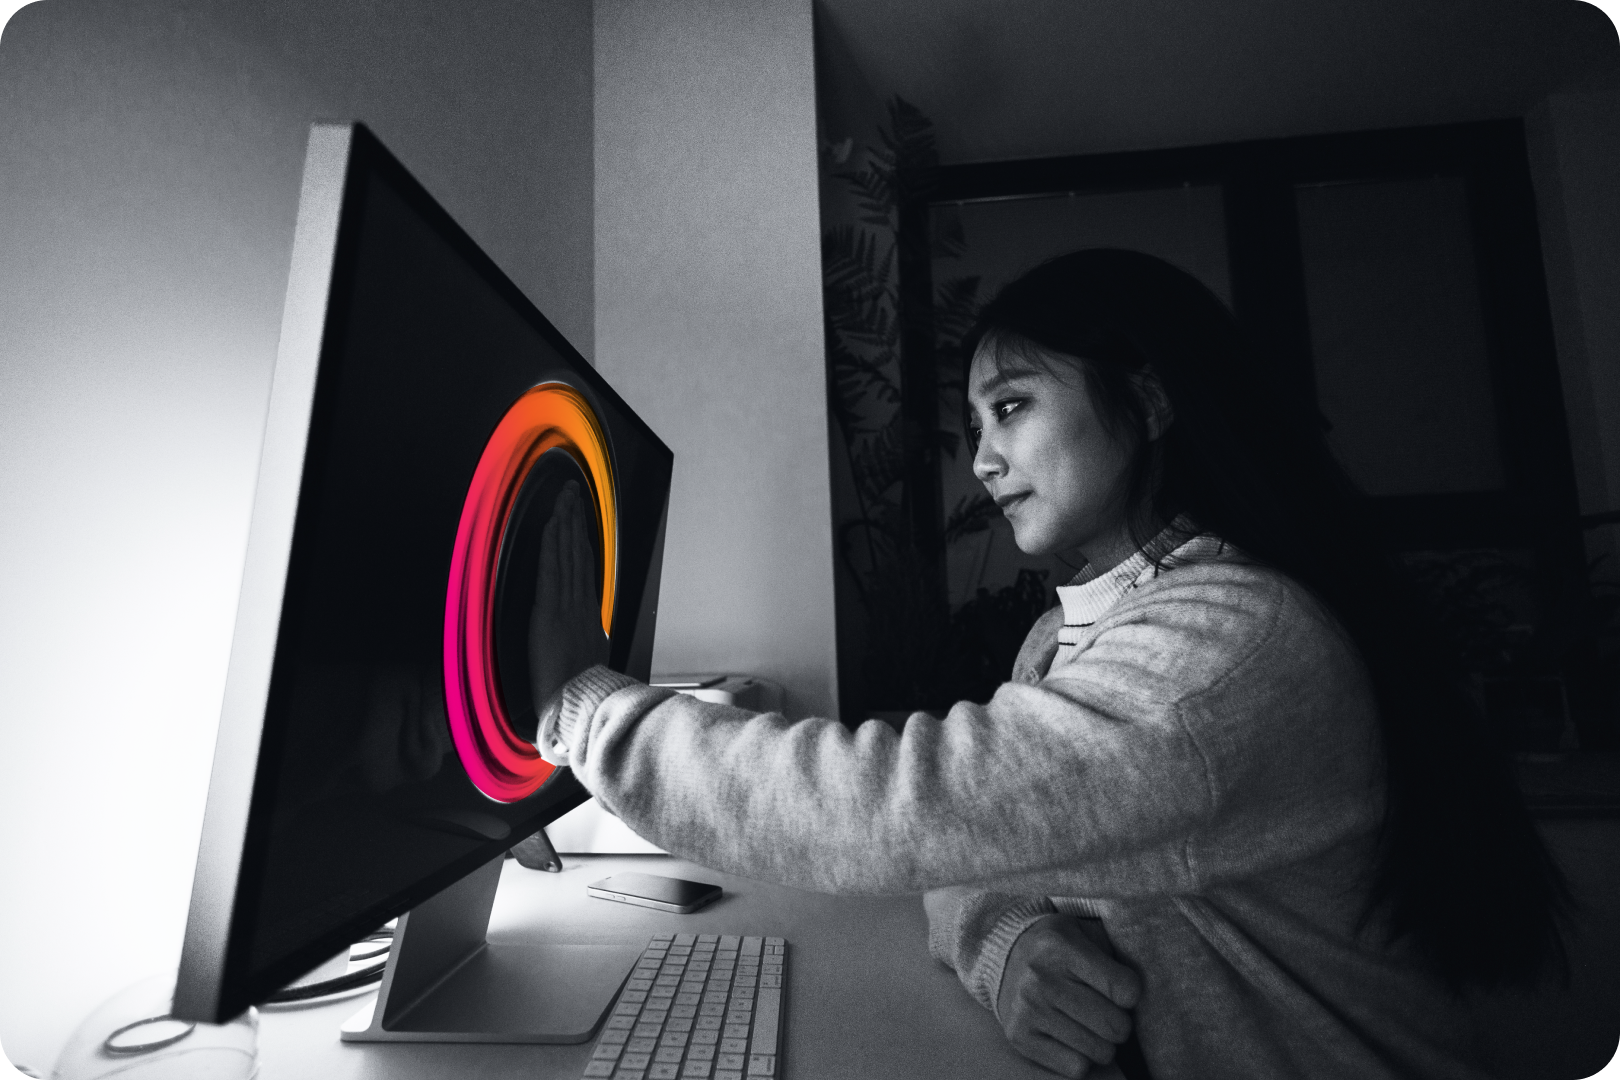 woman putting hand on monitor, a pink circle surrounds her hand